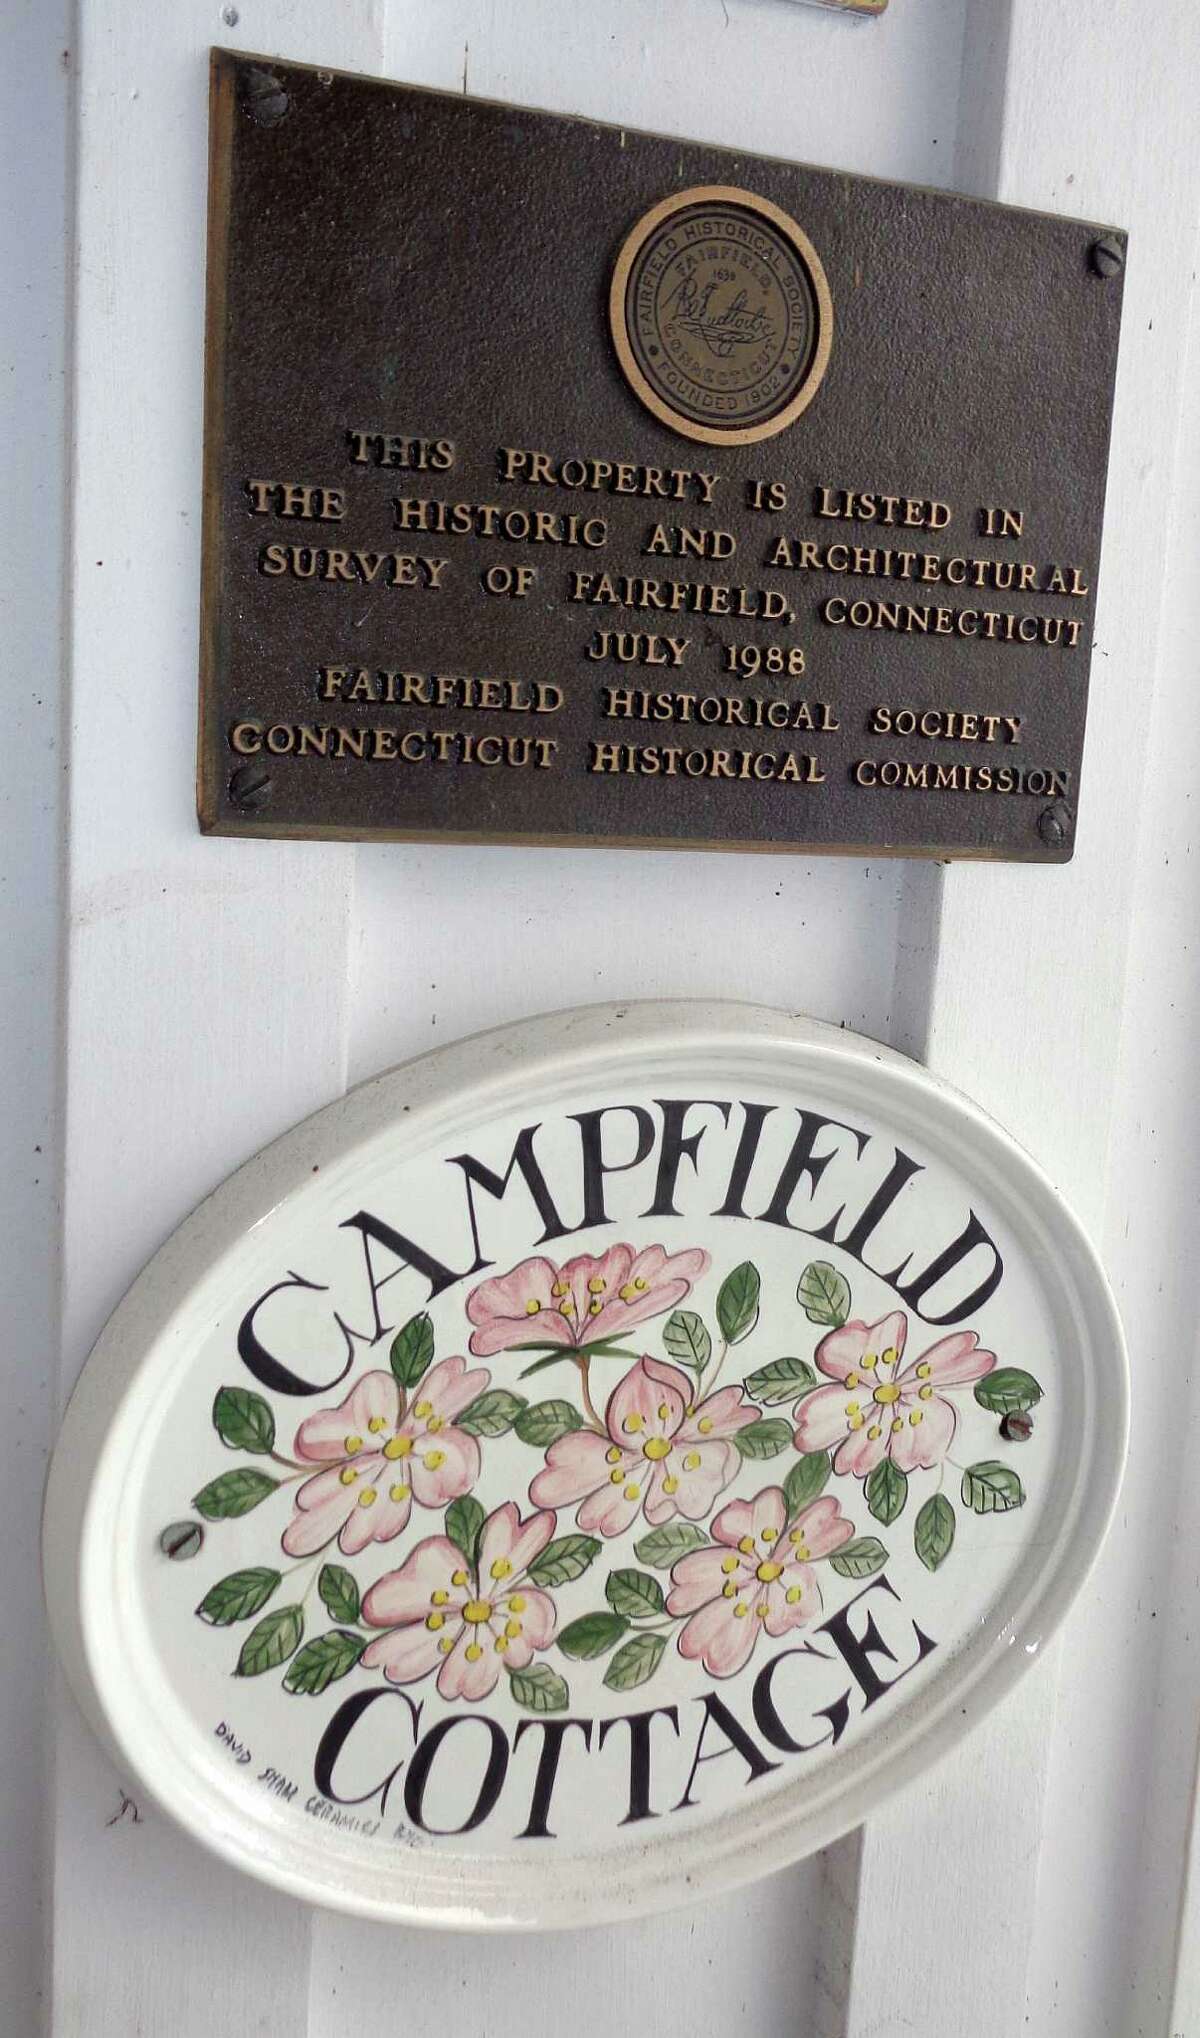 Plaques at the Sunnieholme property note its legacy as one-time part of the Annie B. Jennings estate.